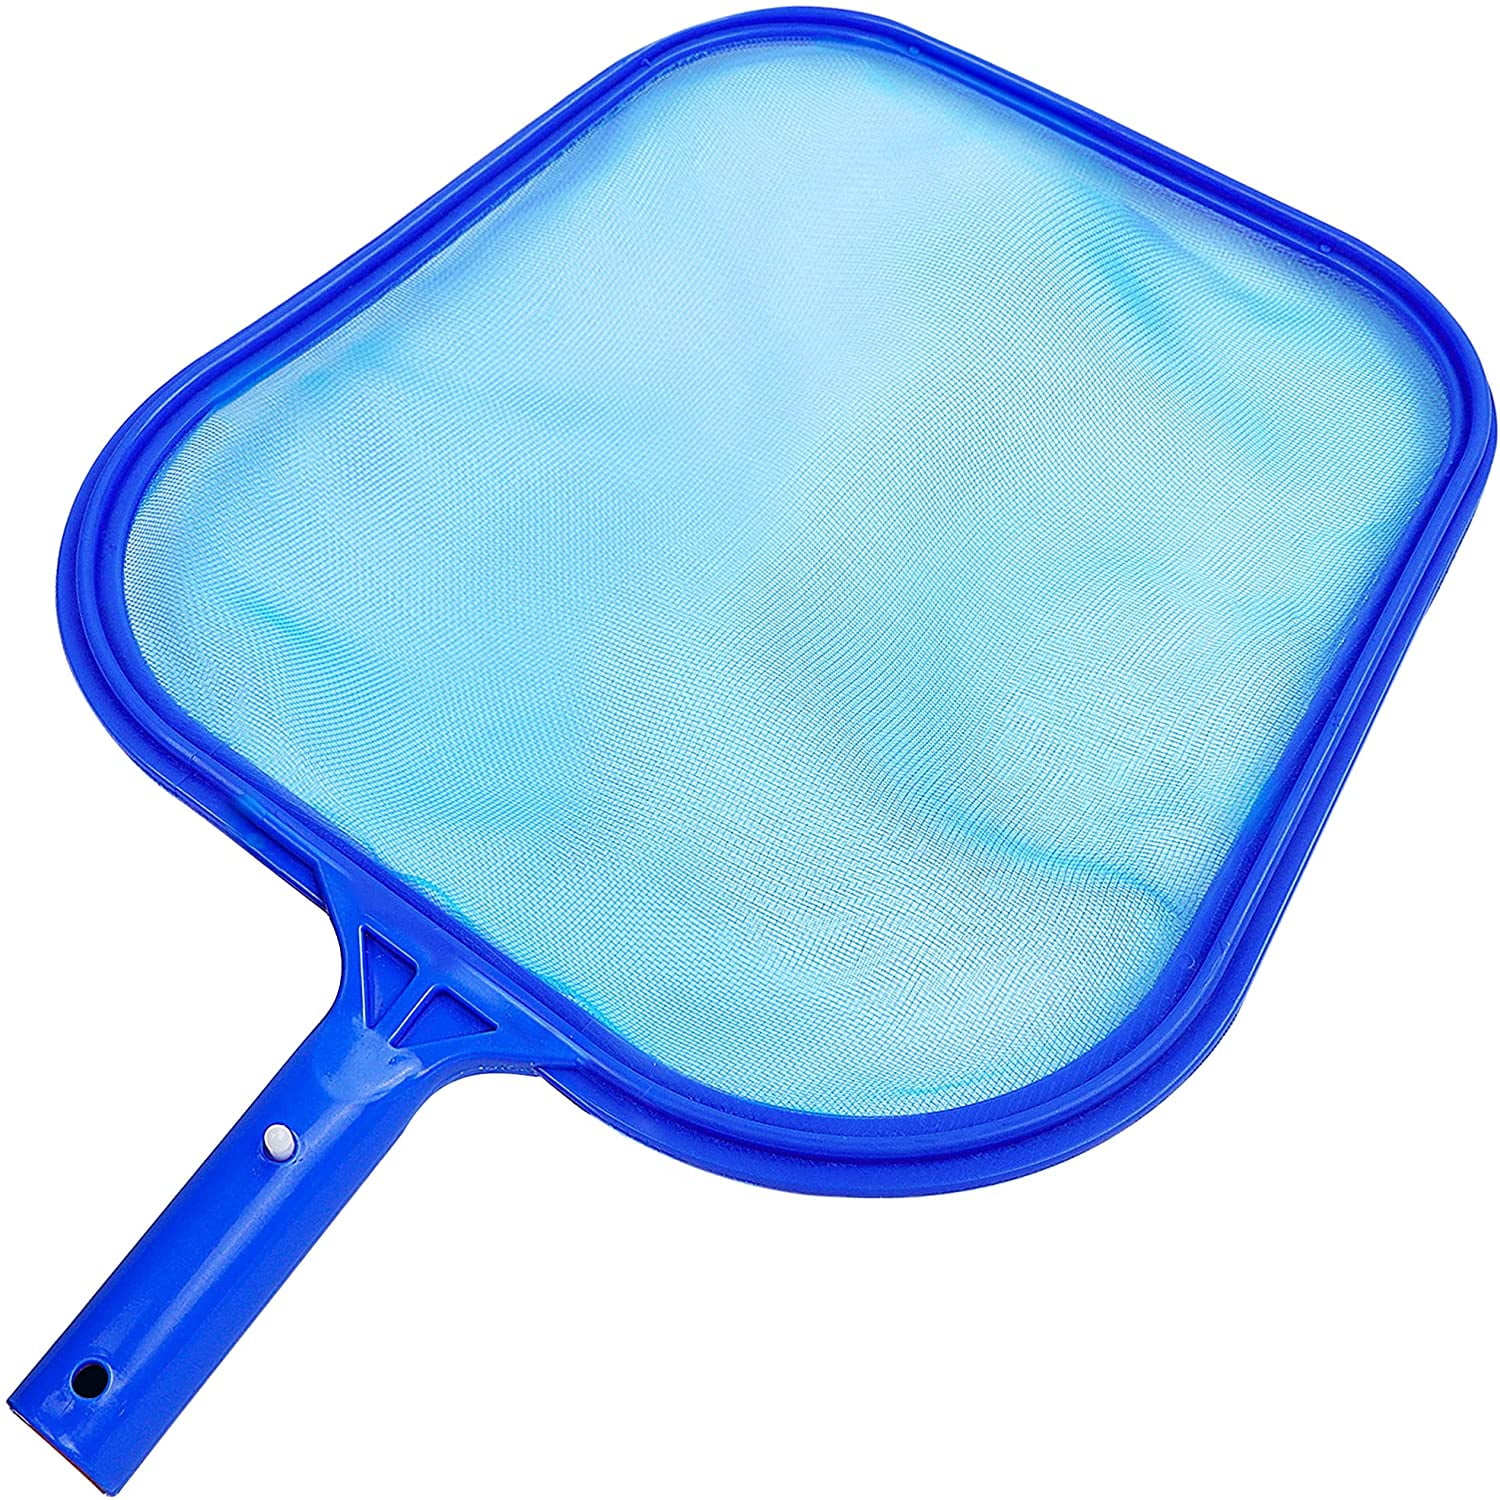 Details about   Swimming Pool Leaf Skimmer Rake Net Hot Tub Spa Cleaning Leaves Mesh Tools Clean 